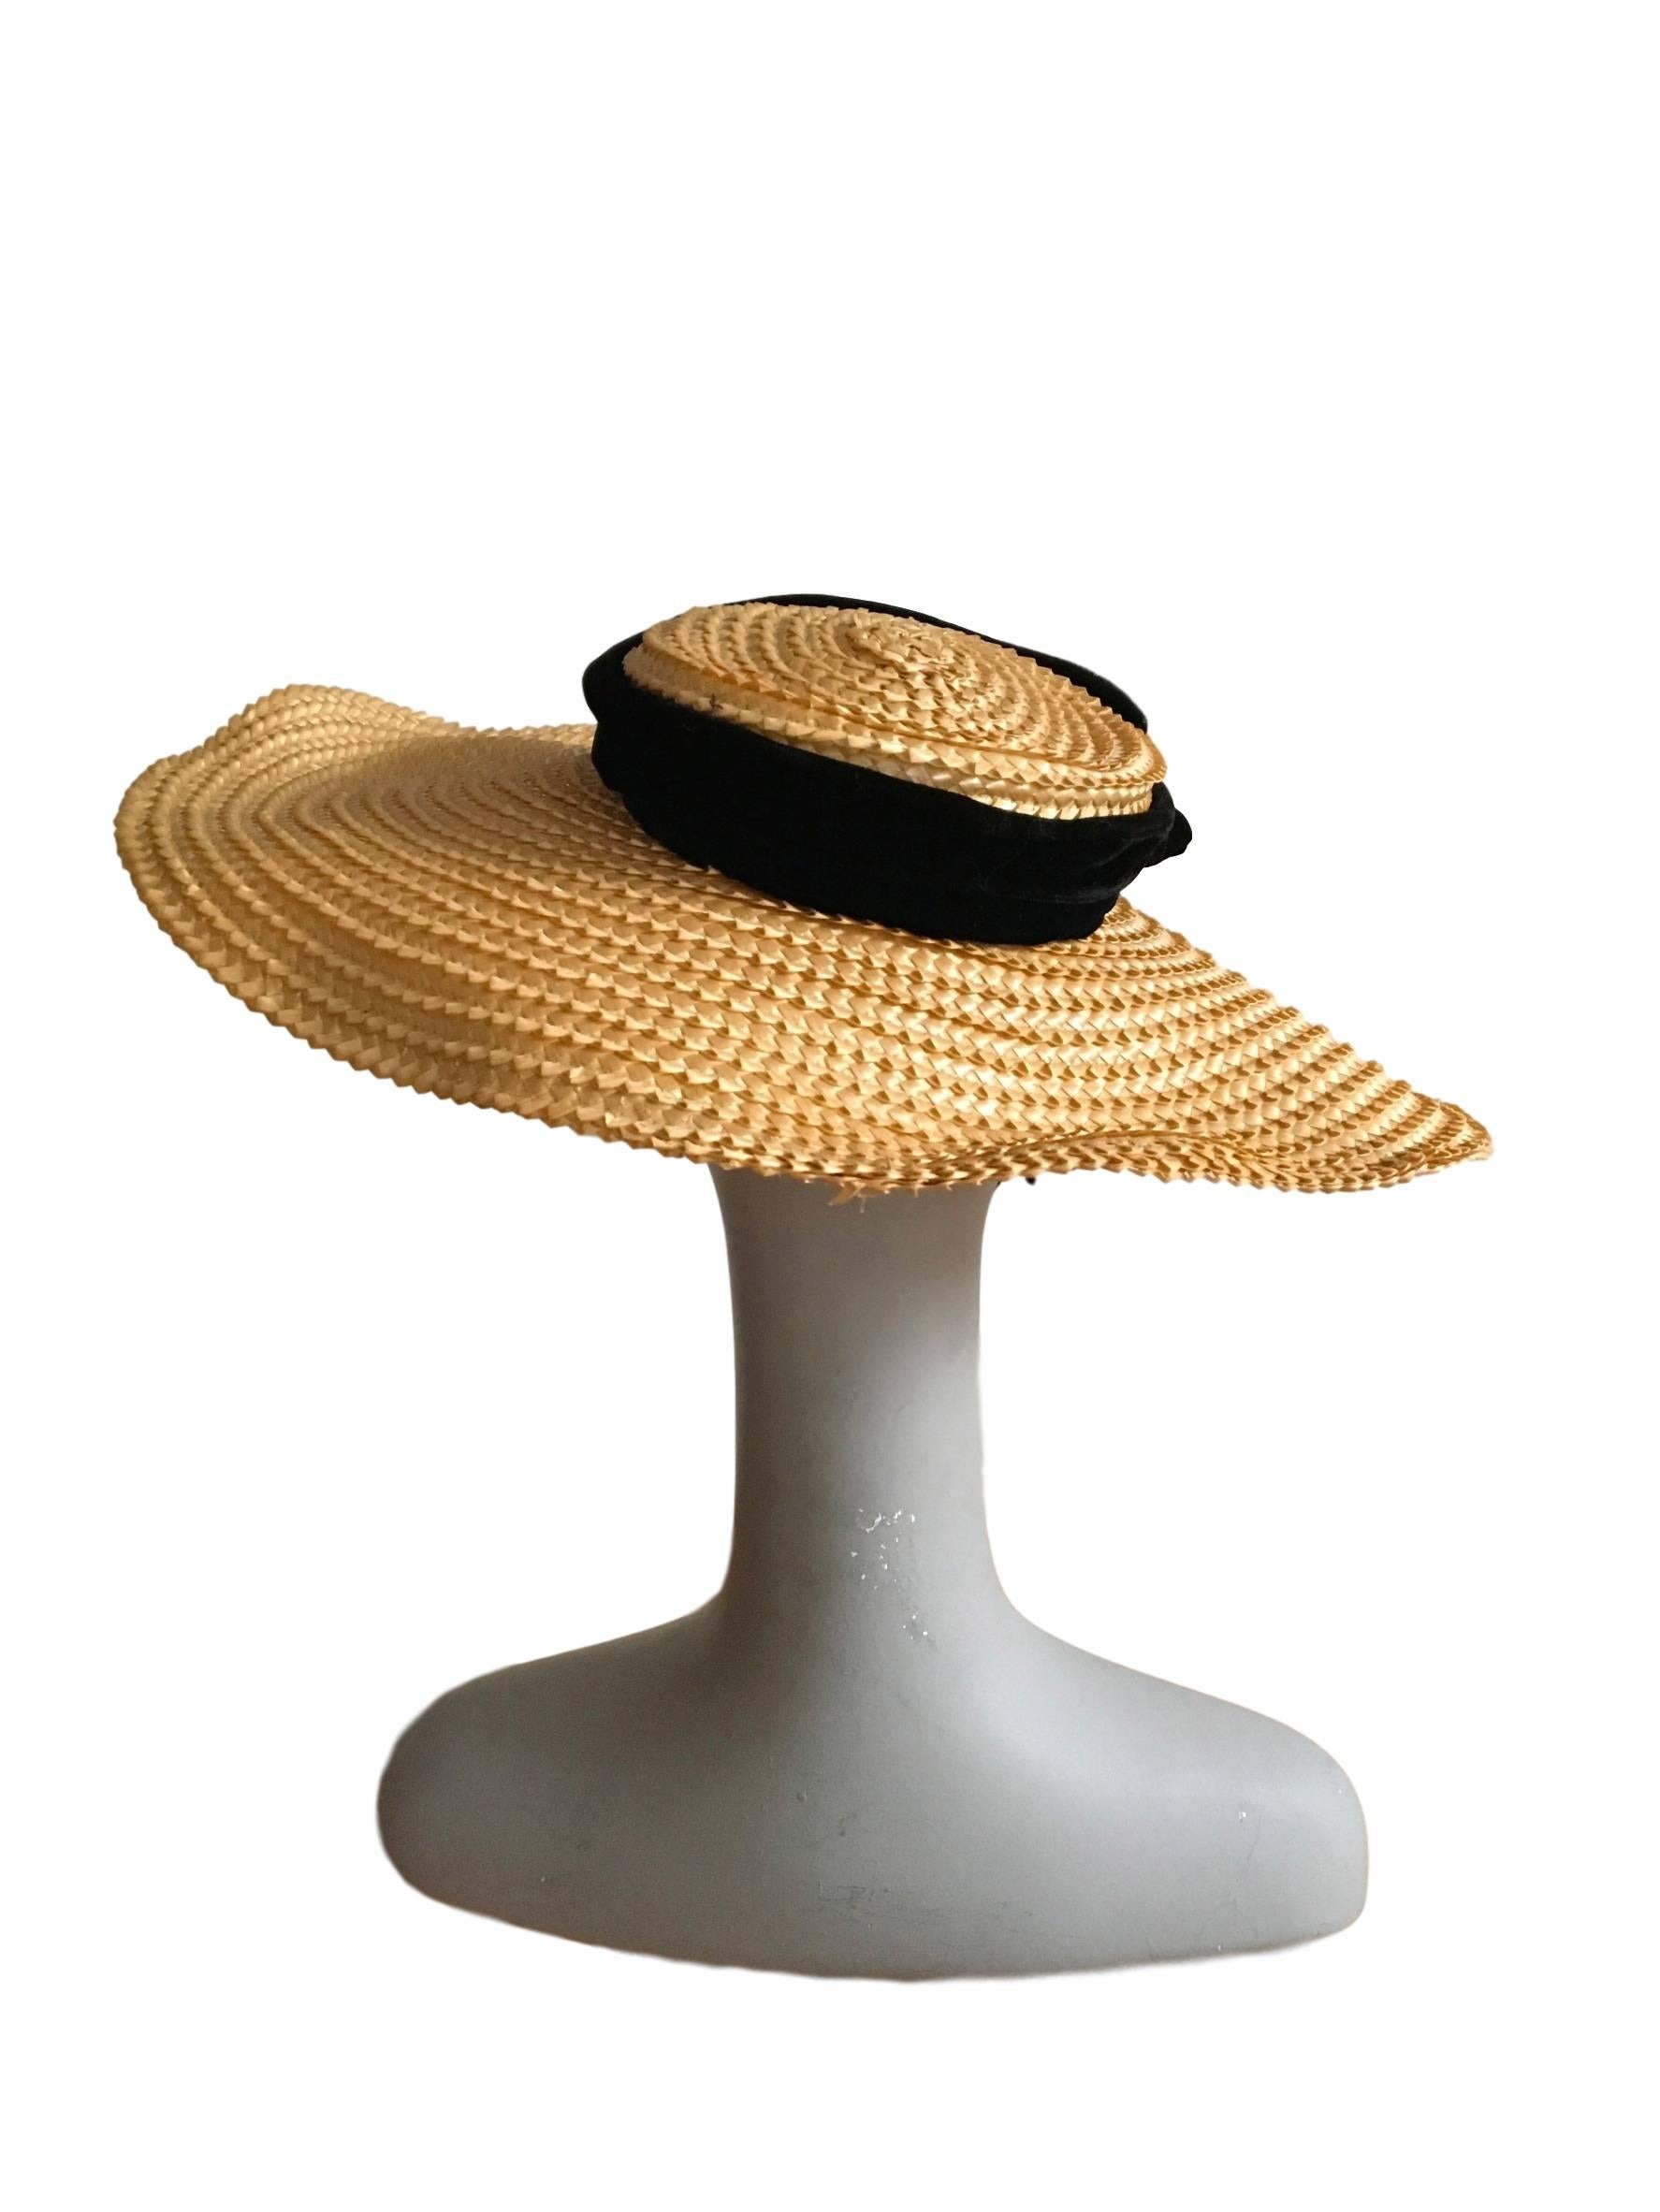 1950s/60s J Marti Marti straw and velvet trim saucer hat. A beautiful example of Spanish Mid Century Millinery, the intentional wobble in the rim makes it so kooky and characterful, has elasticated chin/bun strap.

Measures 19 inches across whole